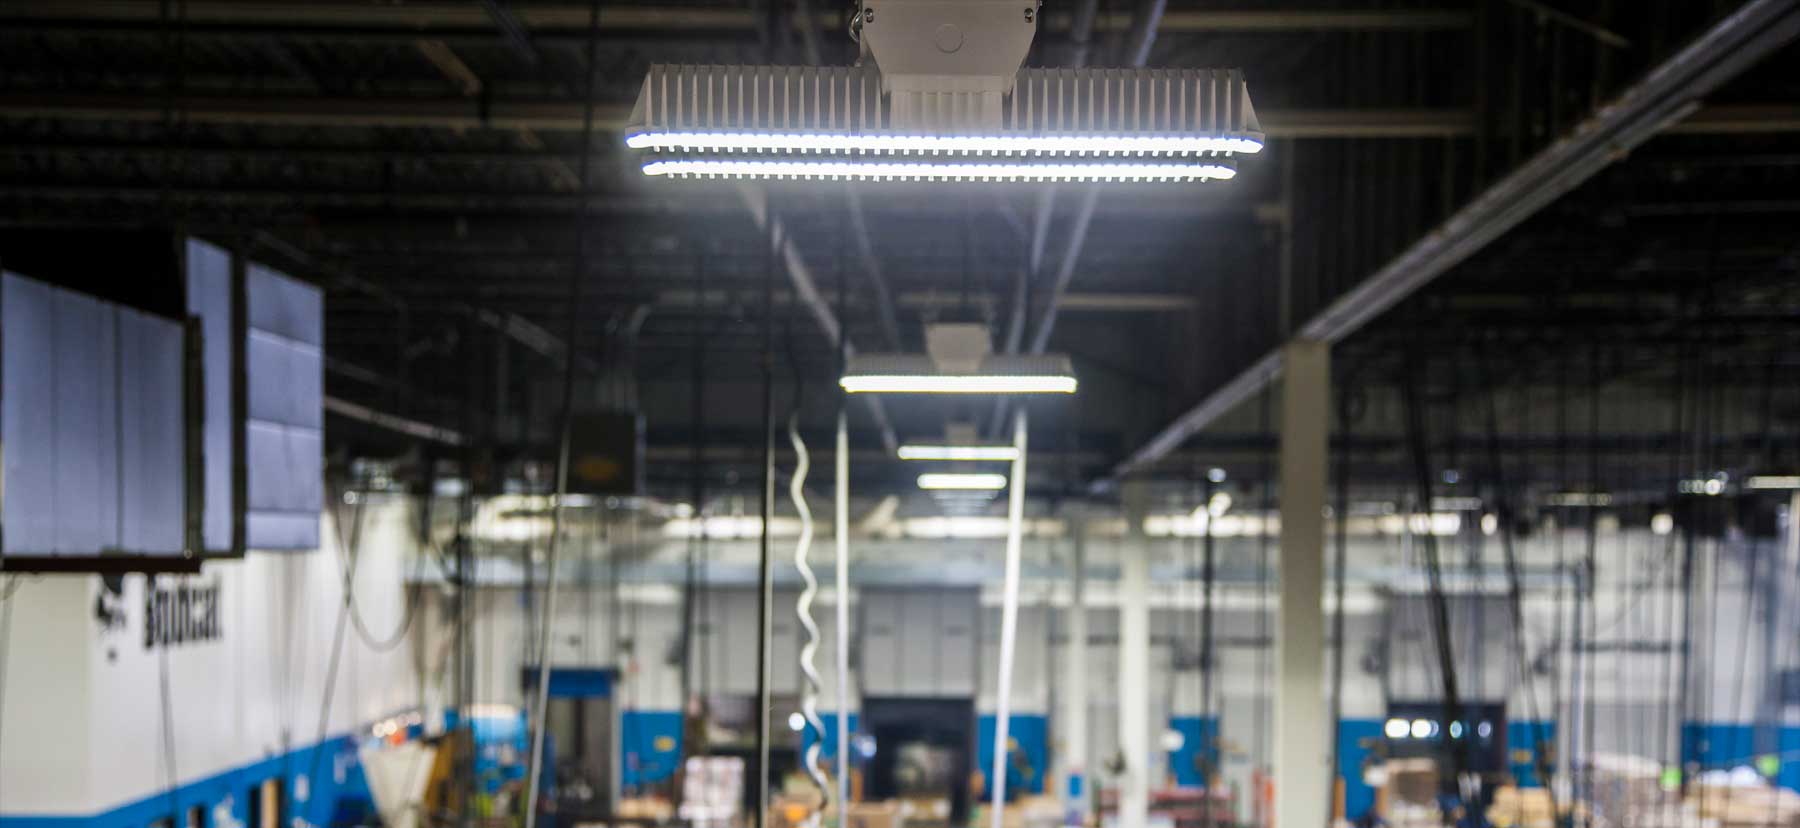 LED fixture in industrial setting 